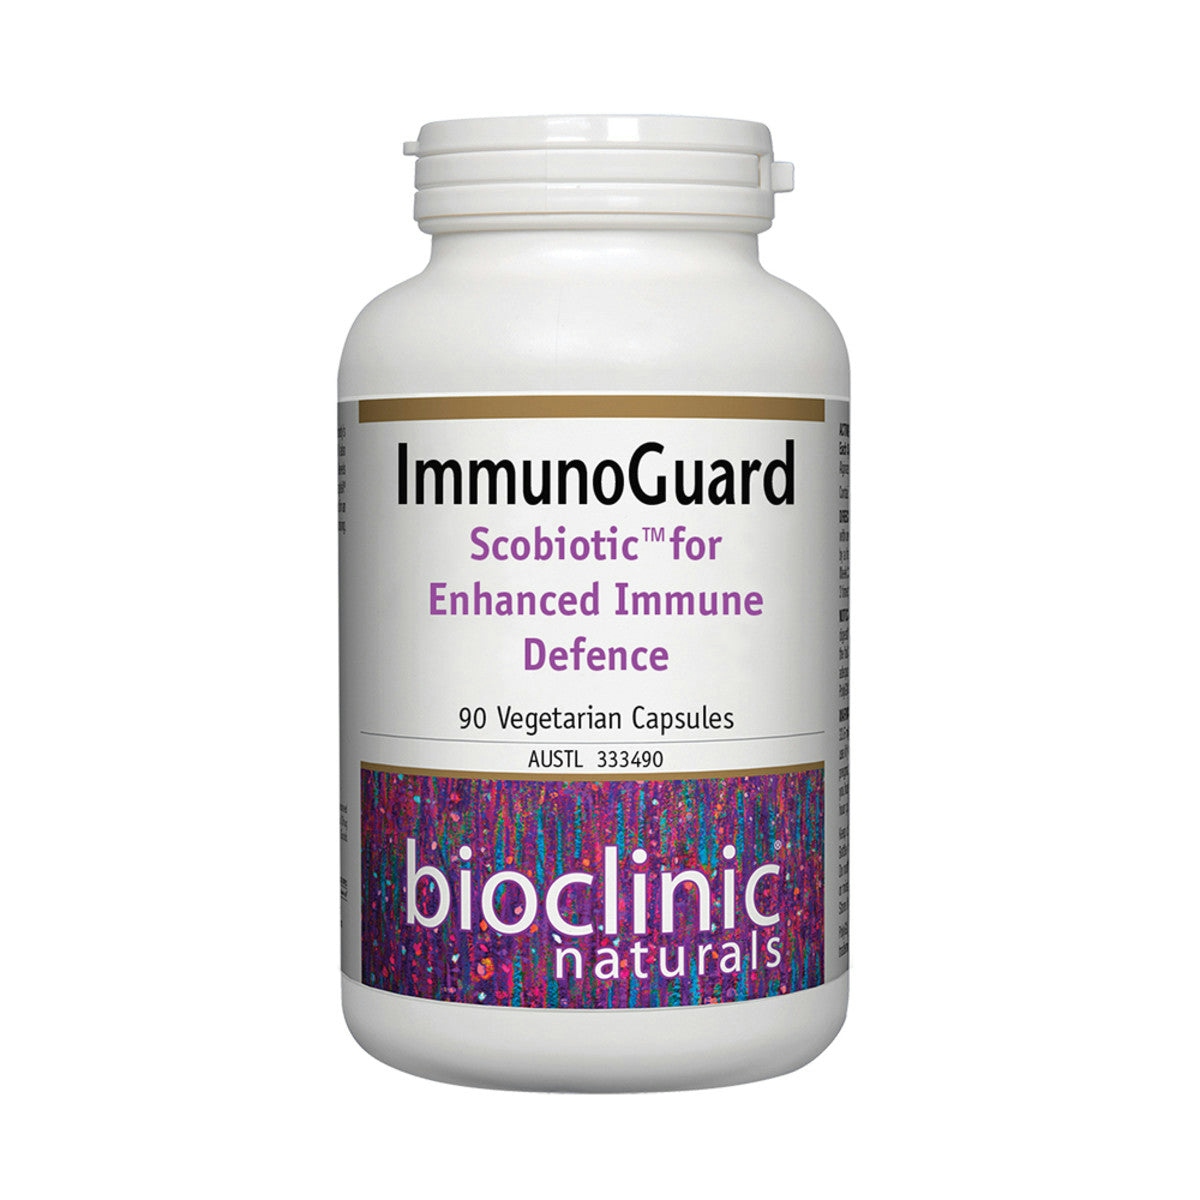 Image of Bioclinic Naturals Immunoguard 90vc with a white background